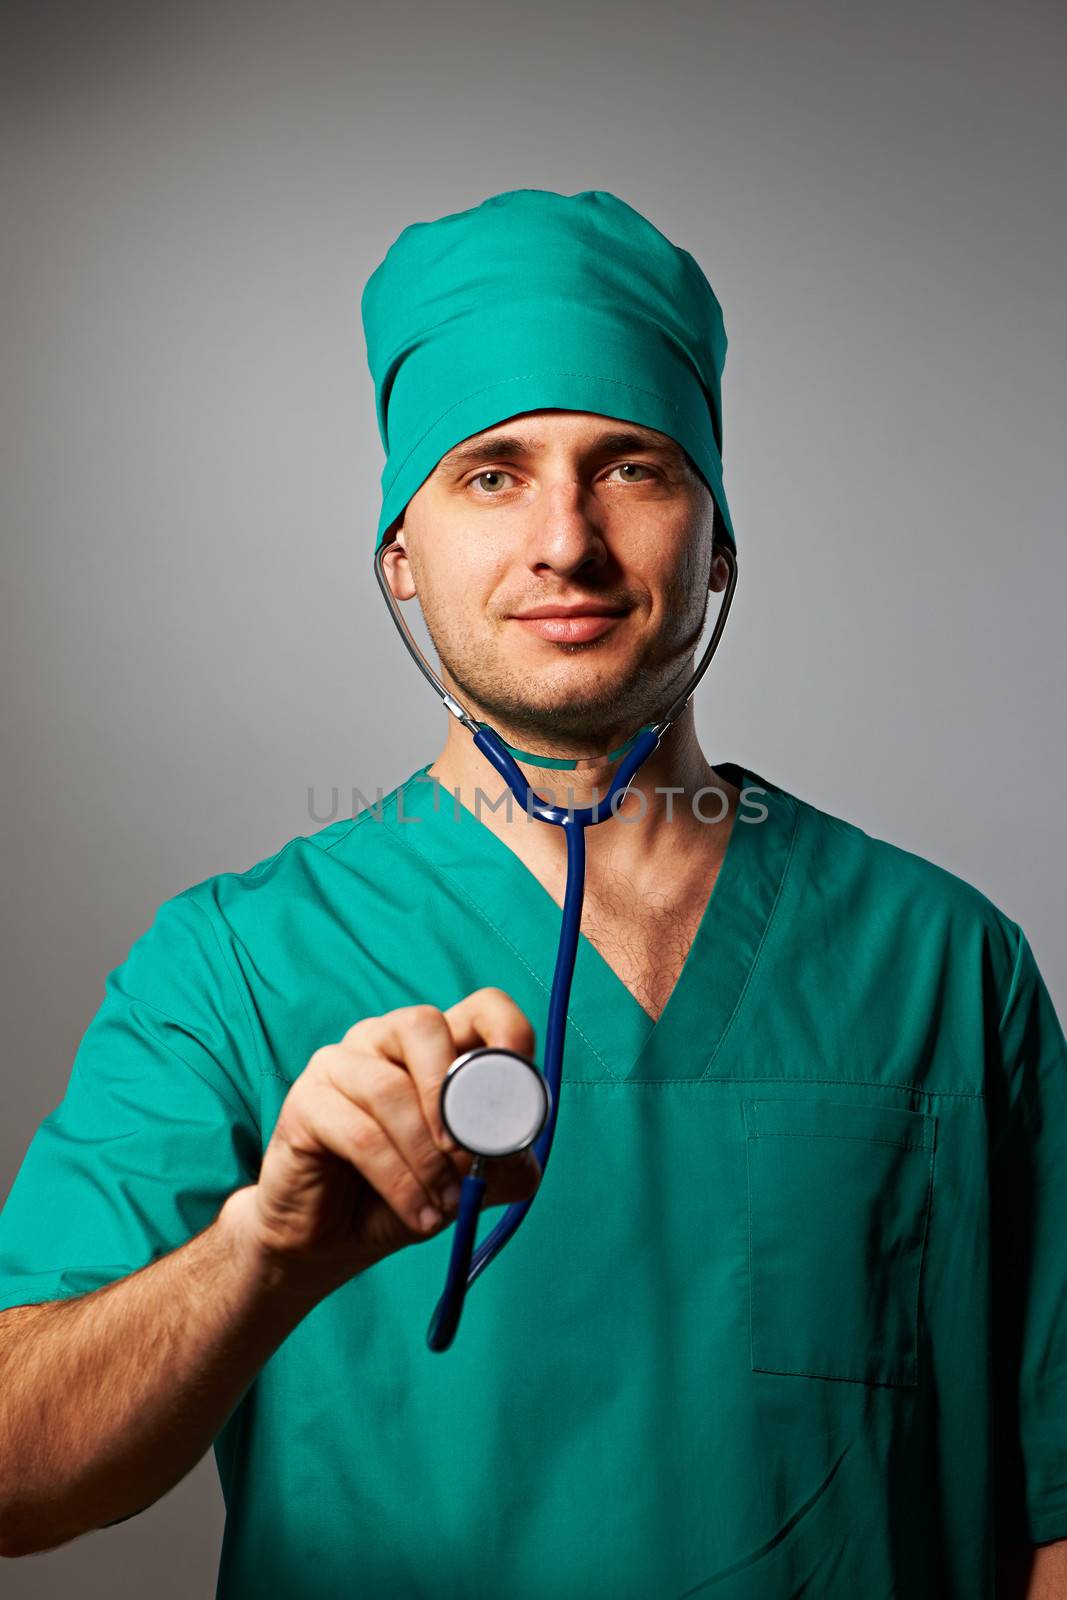 Surgeon with stethoscope by haveseen